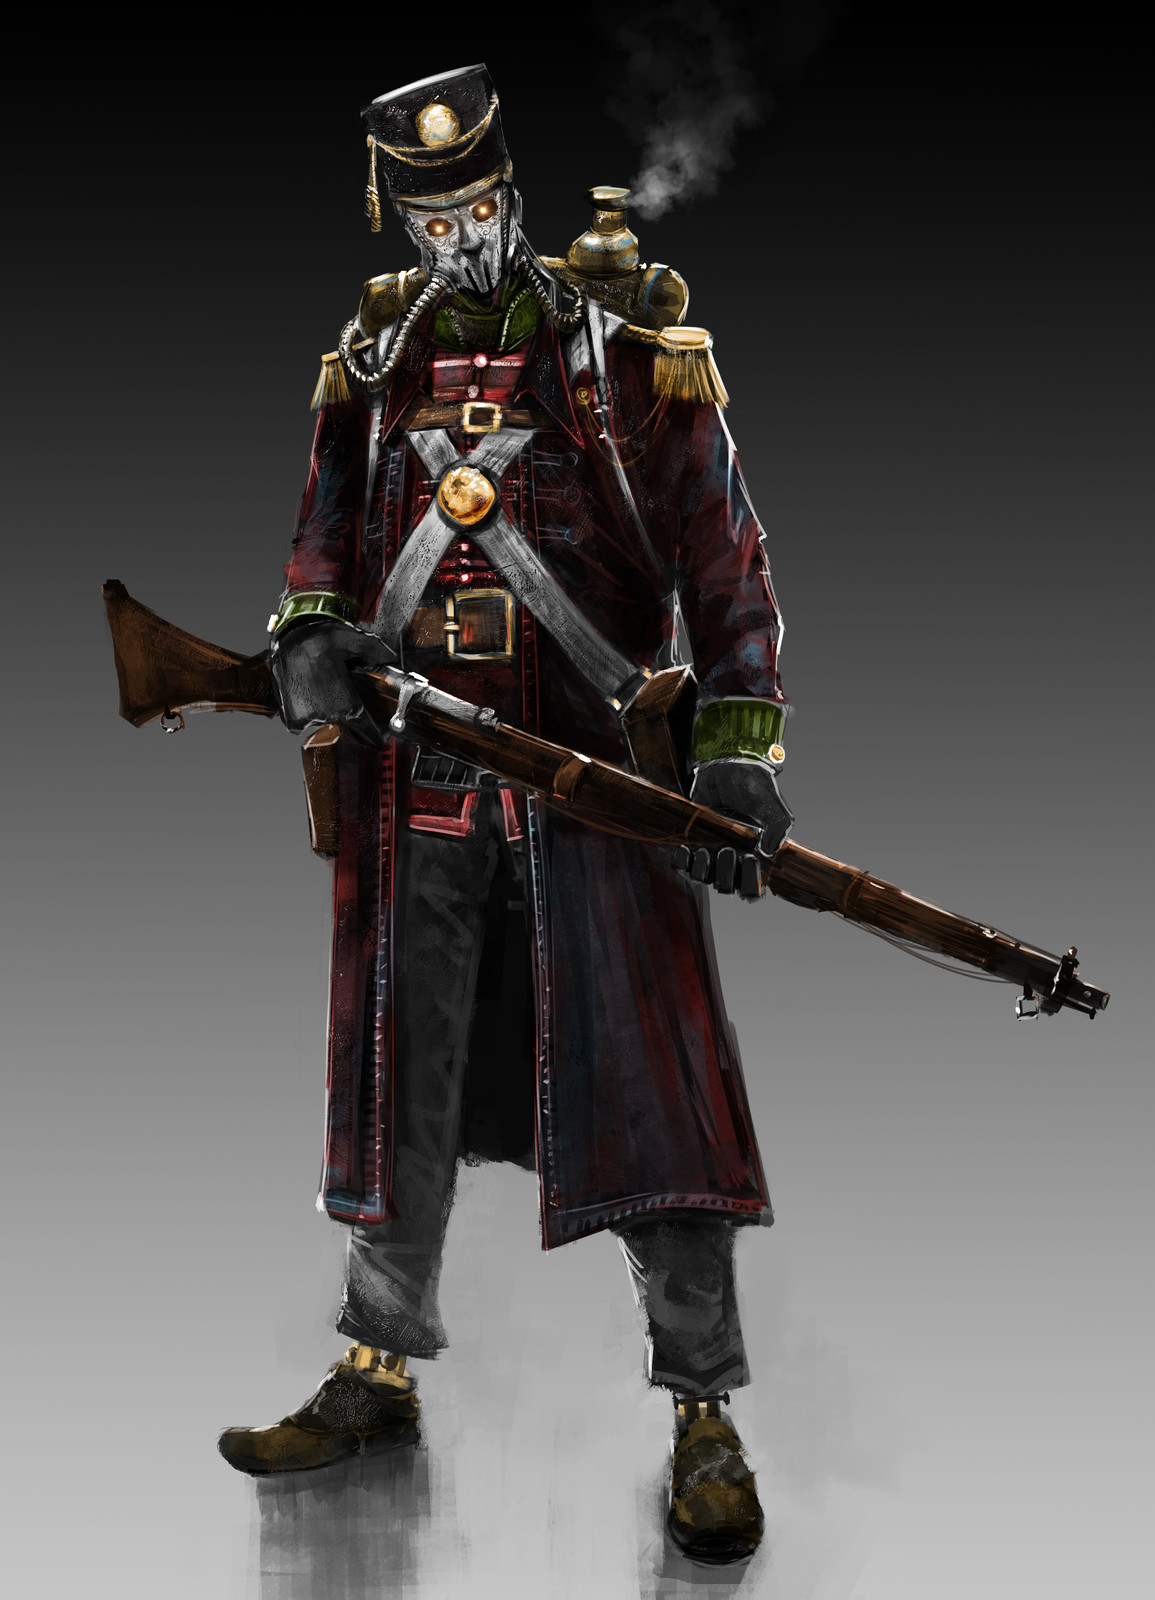 1865 Clockwork Soldier Concept, steps put in as well  :)